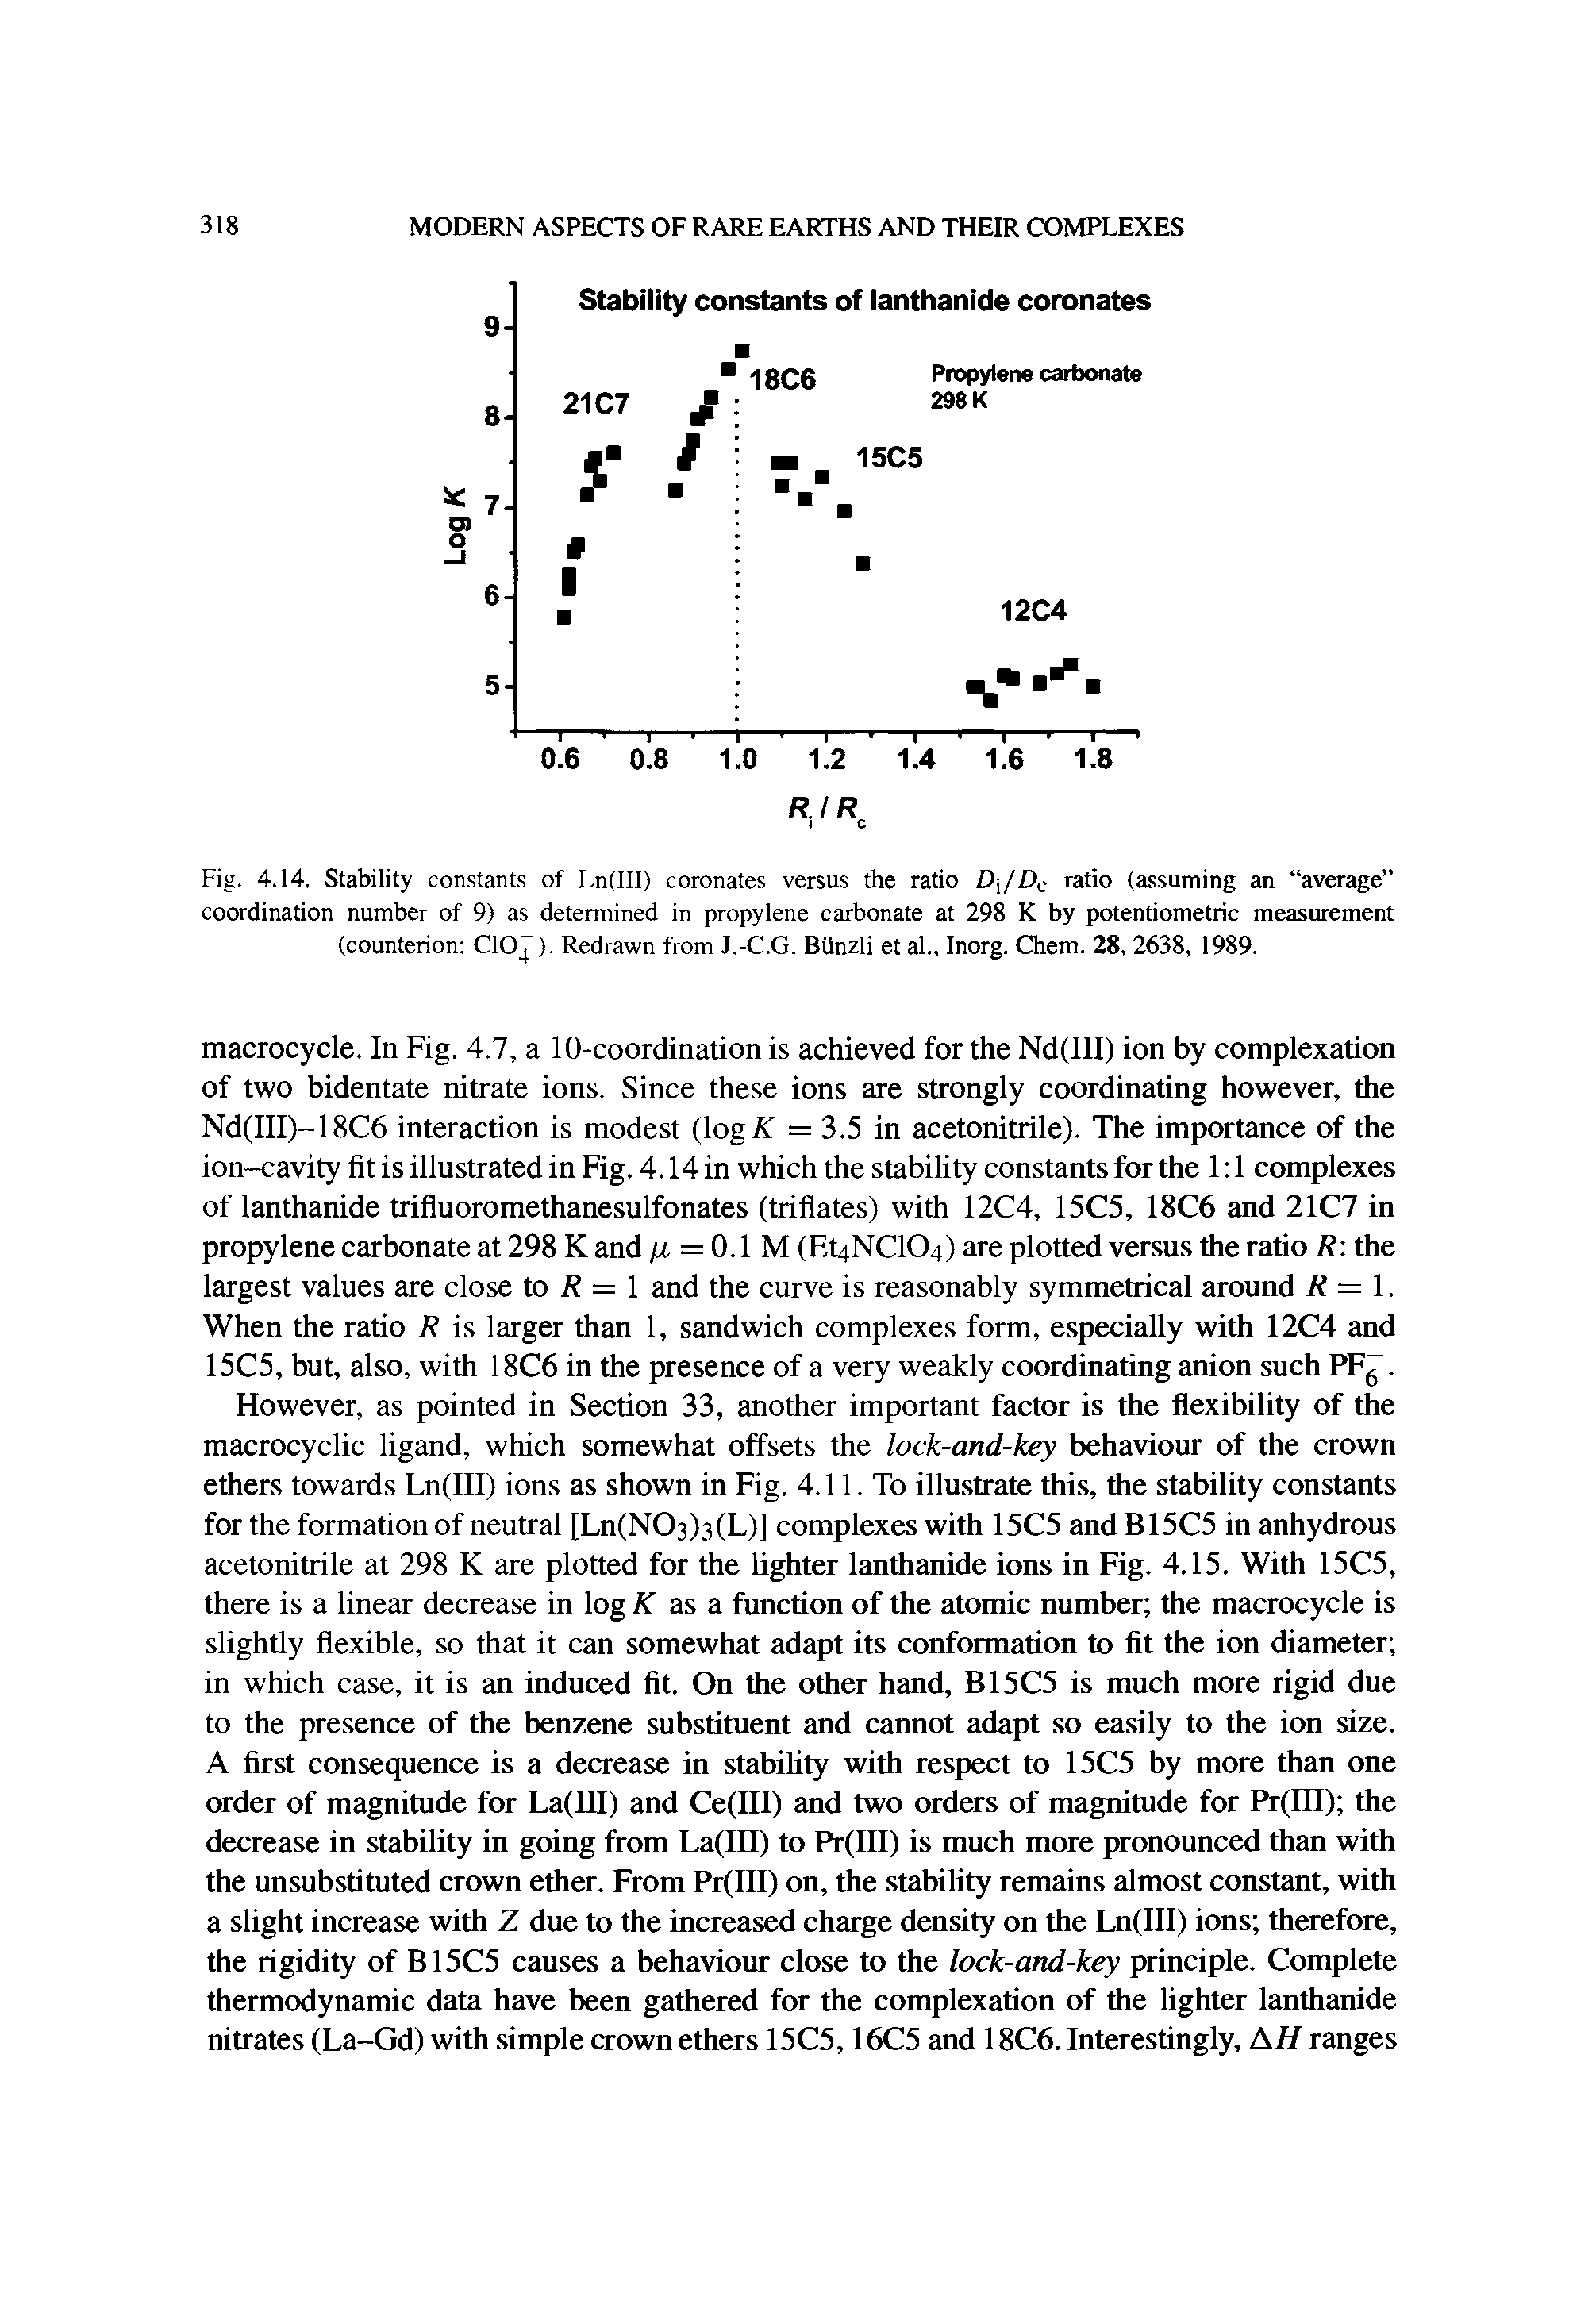 Fig. 4.14. Stability constants of Ln(III) coronates versus the ratio D /Dc ratio (assuming an average coordination number of 9) as determined in propylene carbonate at 298 K by potentiometric measurement (counterion CIO ). Redrawn from J.-C.G. Biinzli et al., Inorg. Chem. 28, 2638, 1989.